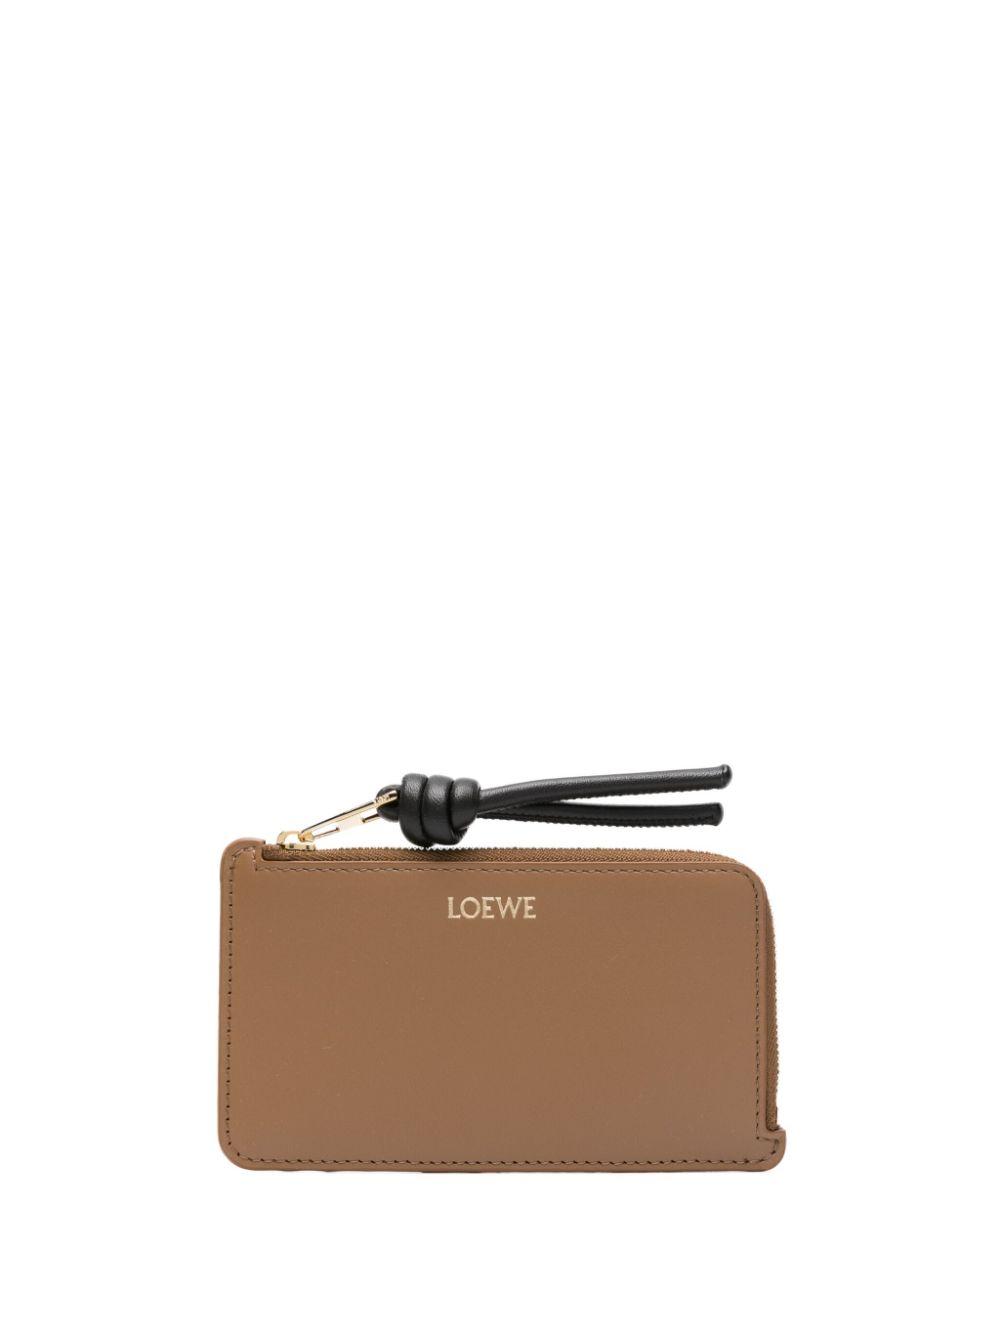 Loewe Leather Knot Coin and Card Holder